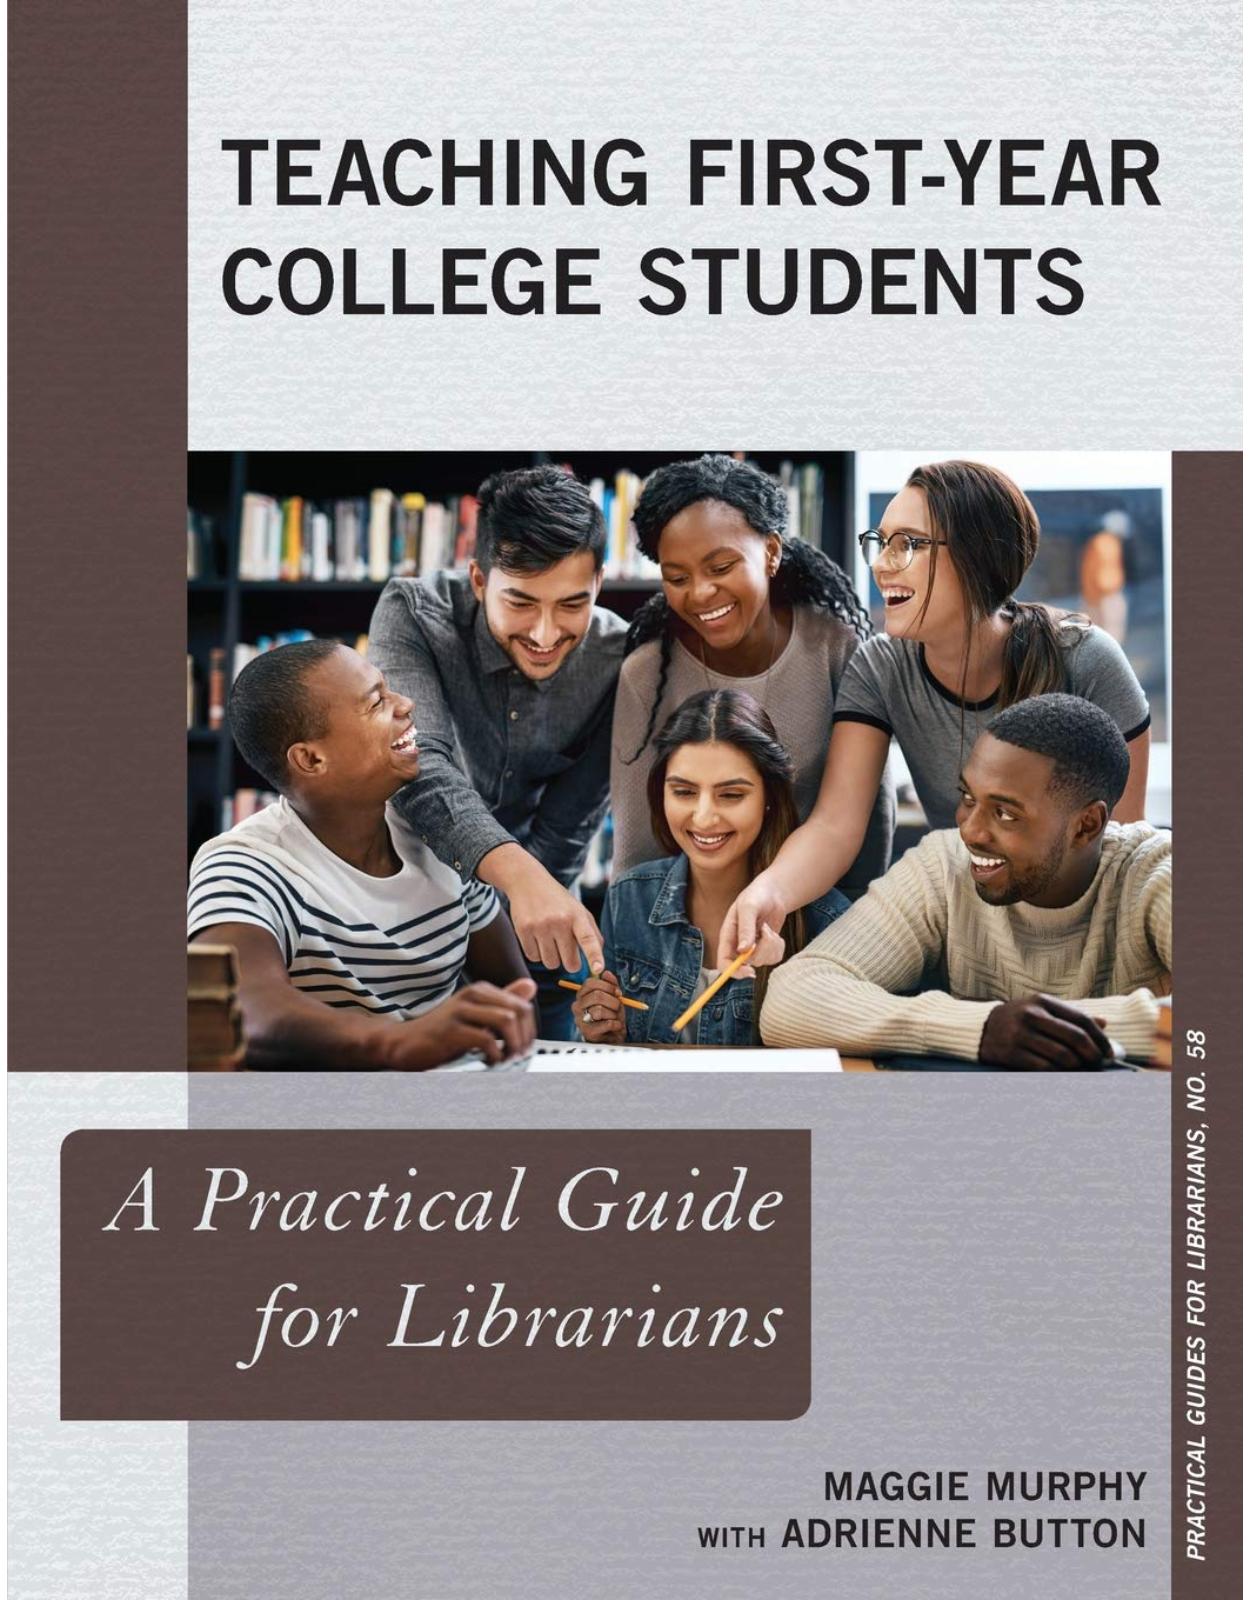 Teaching First-Year College Students. A Practical Guide for Librarians